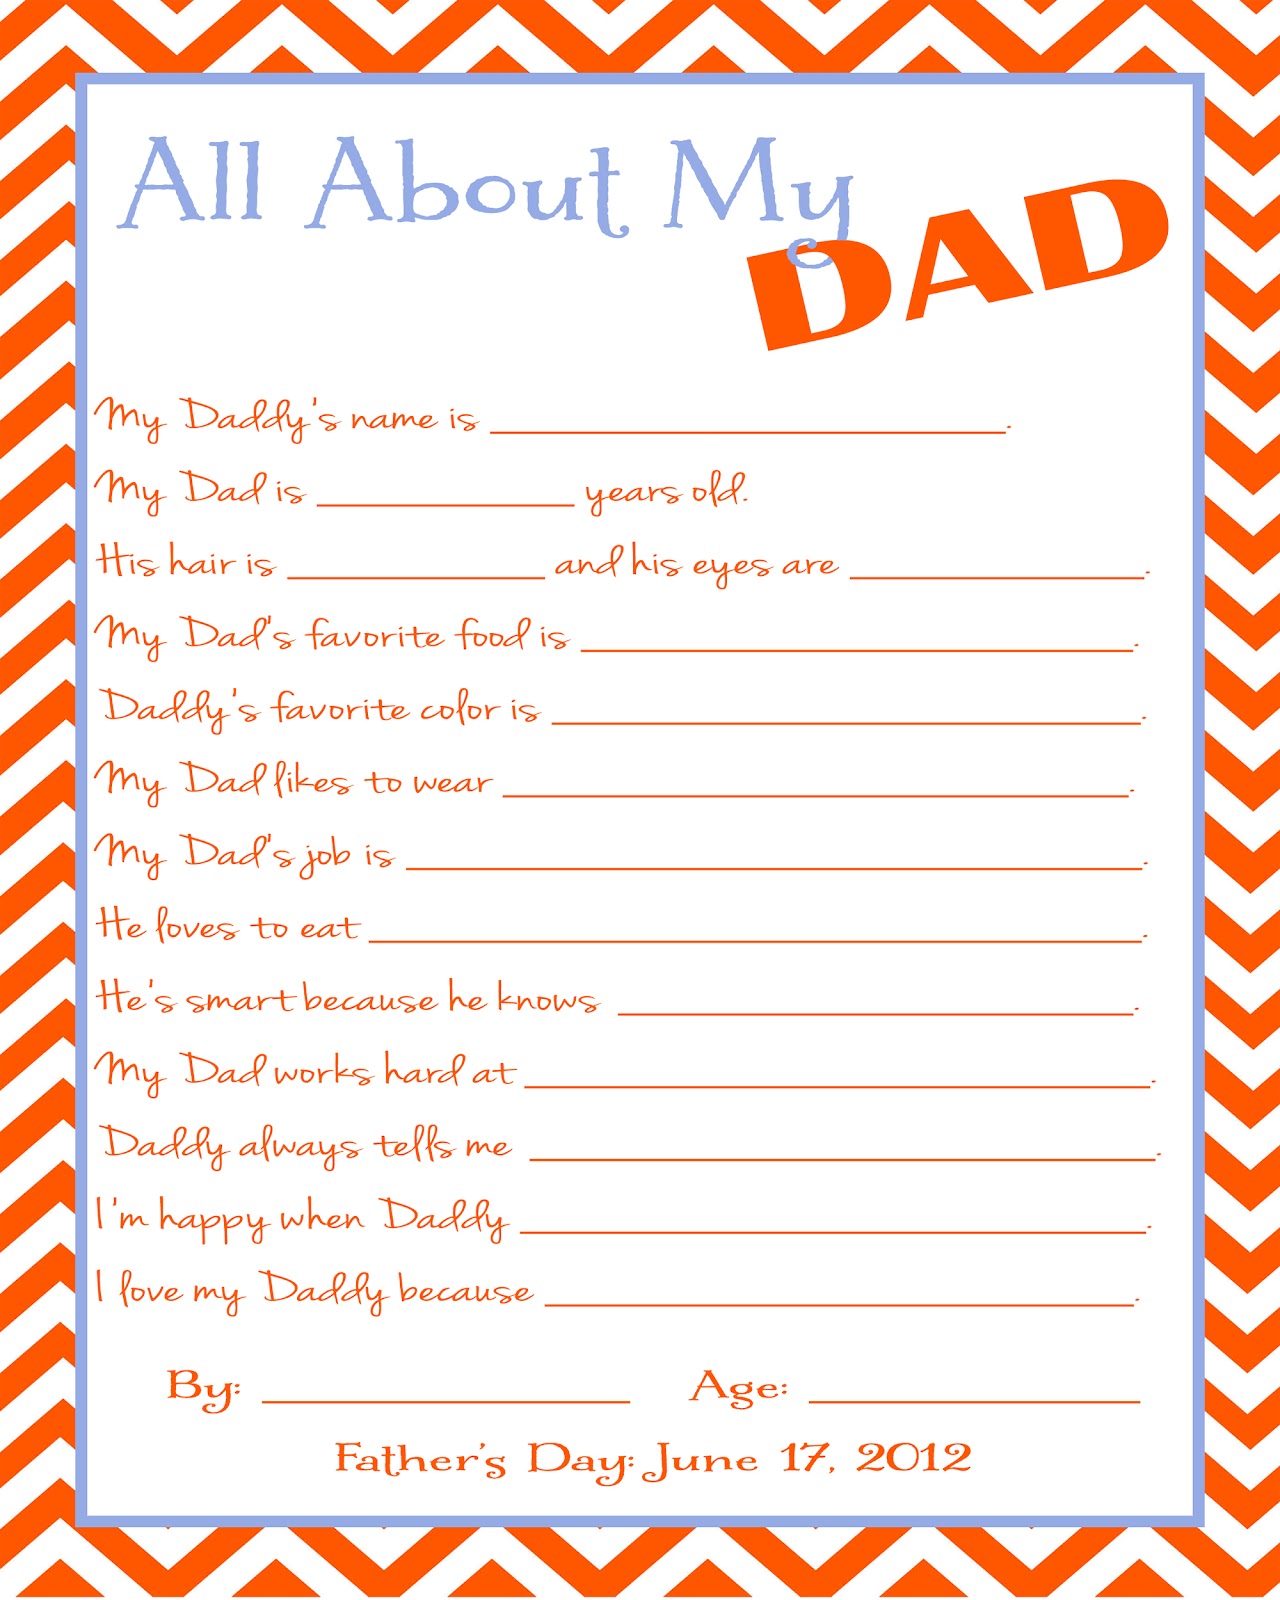 all-about-my-dad-free-printable-book-free-printable-templates